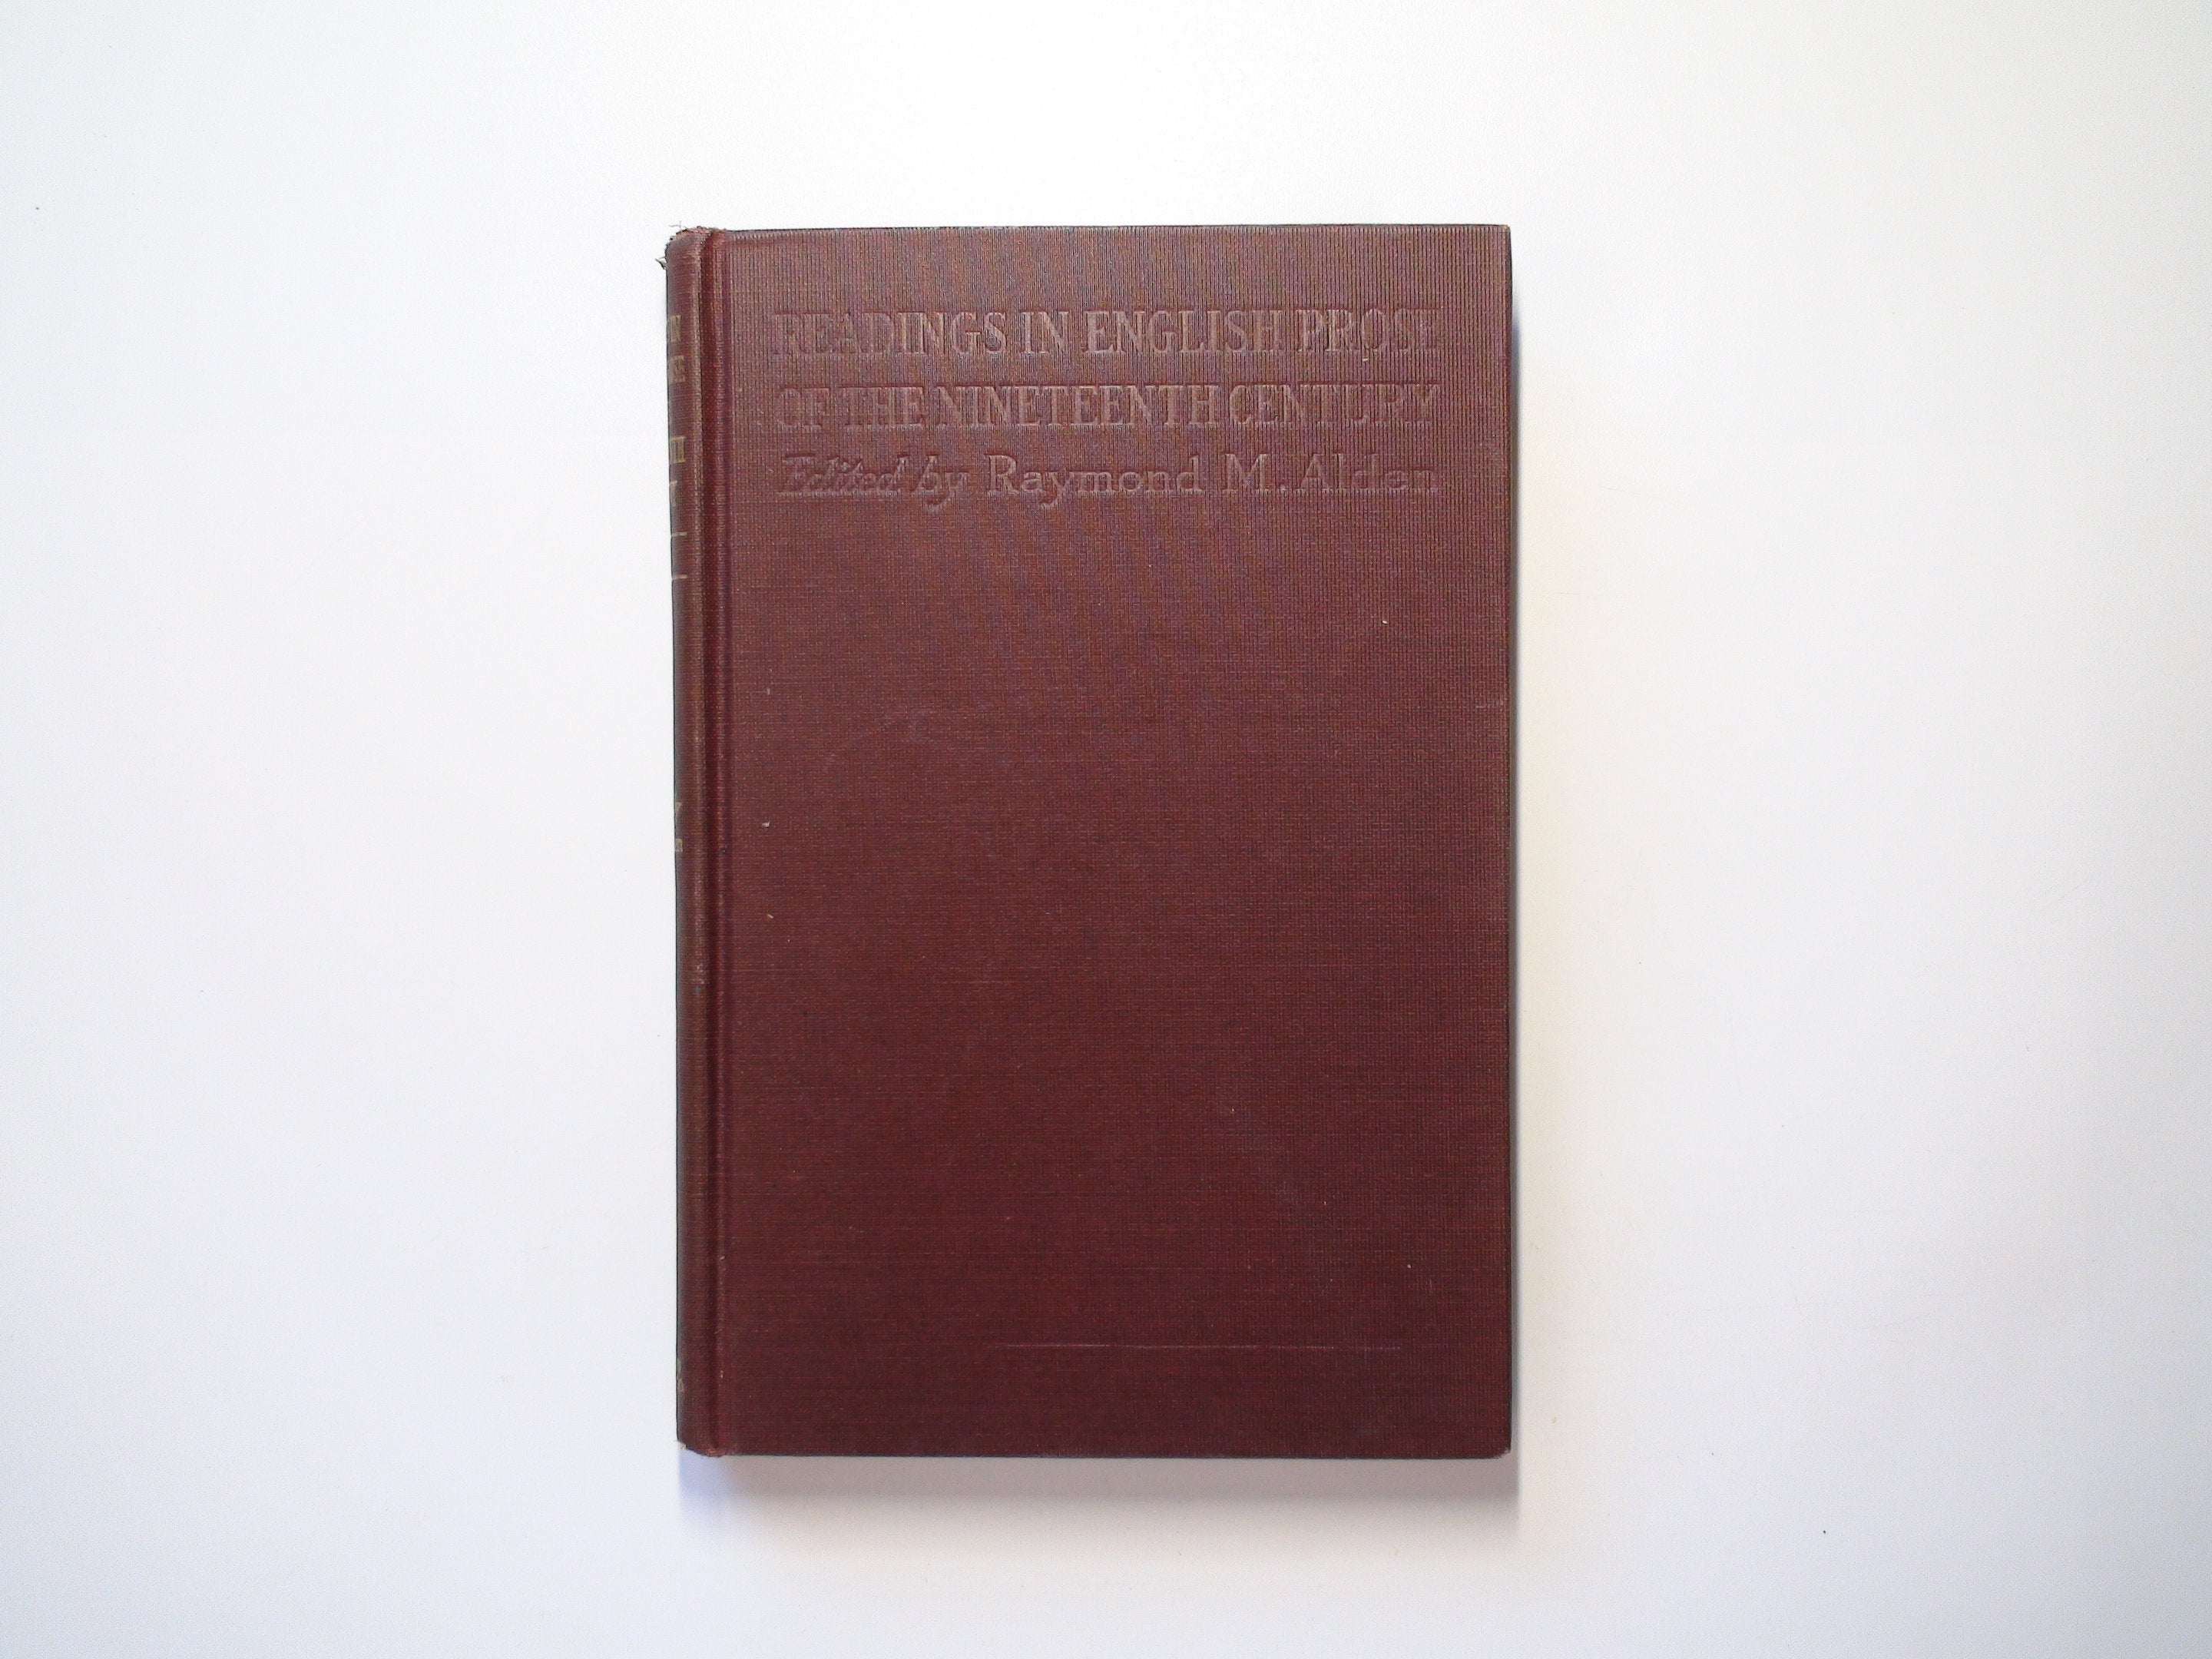 Readings in the English Prose of the Nineteenth Century, Part I, 1917